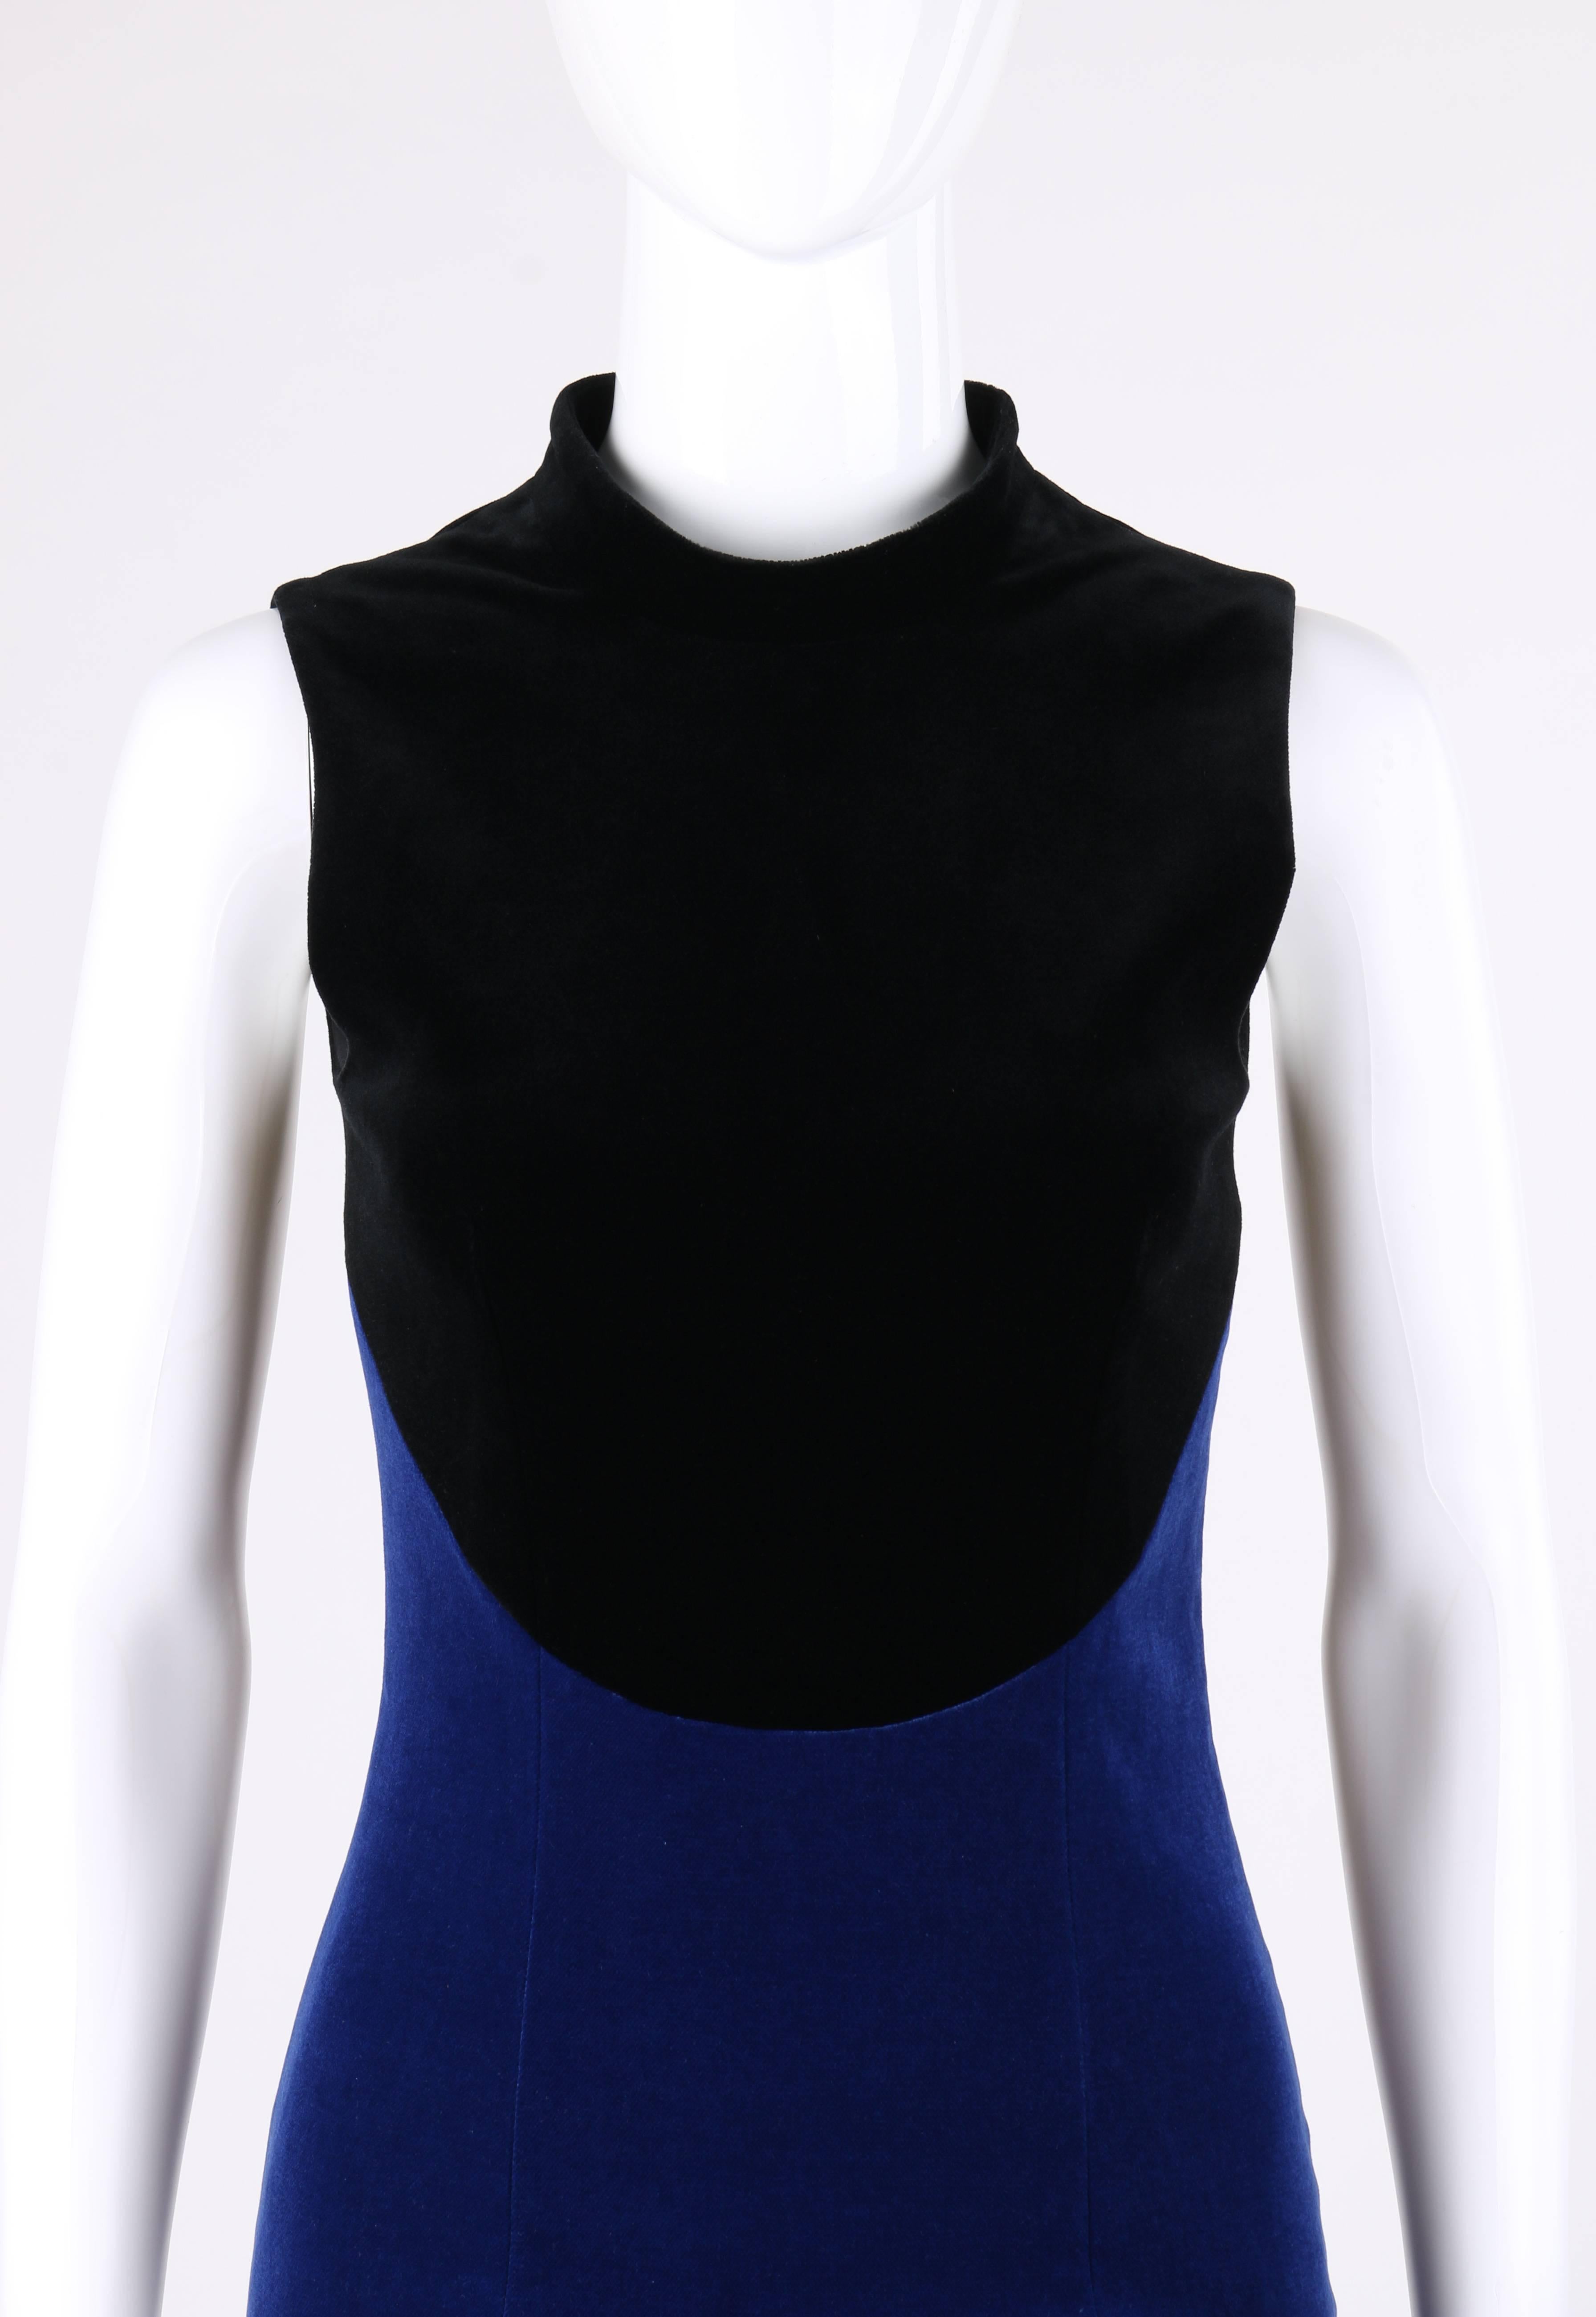 Christopher Kane Pre-Fall 2013 black and royal blue two-tone velvet cocktail dress. Runway look #4. Two-tone velvet with curved dividing seam between black bodice and royal blue shift style skirt. Mandarin collar. Sleeveless. Center back vent.